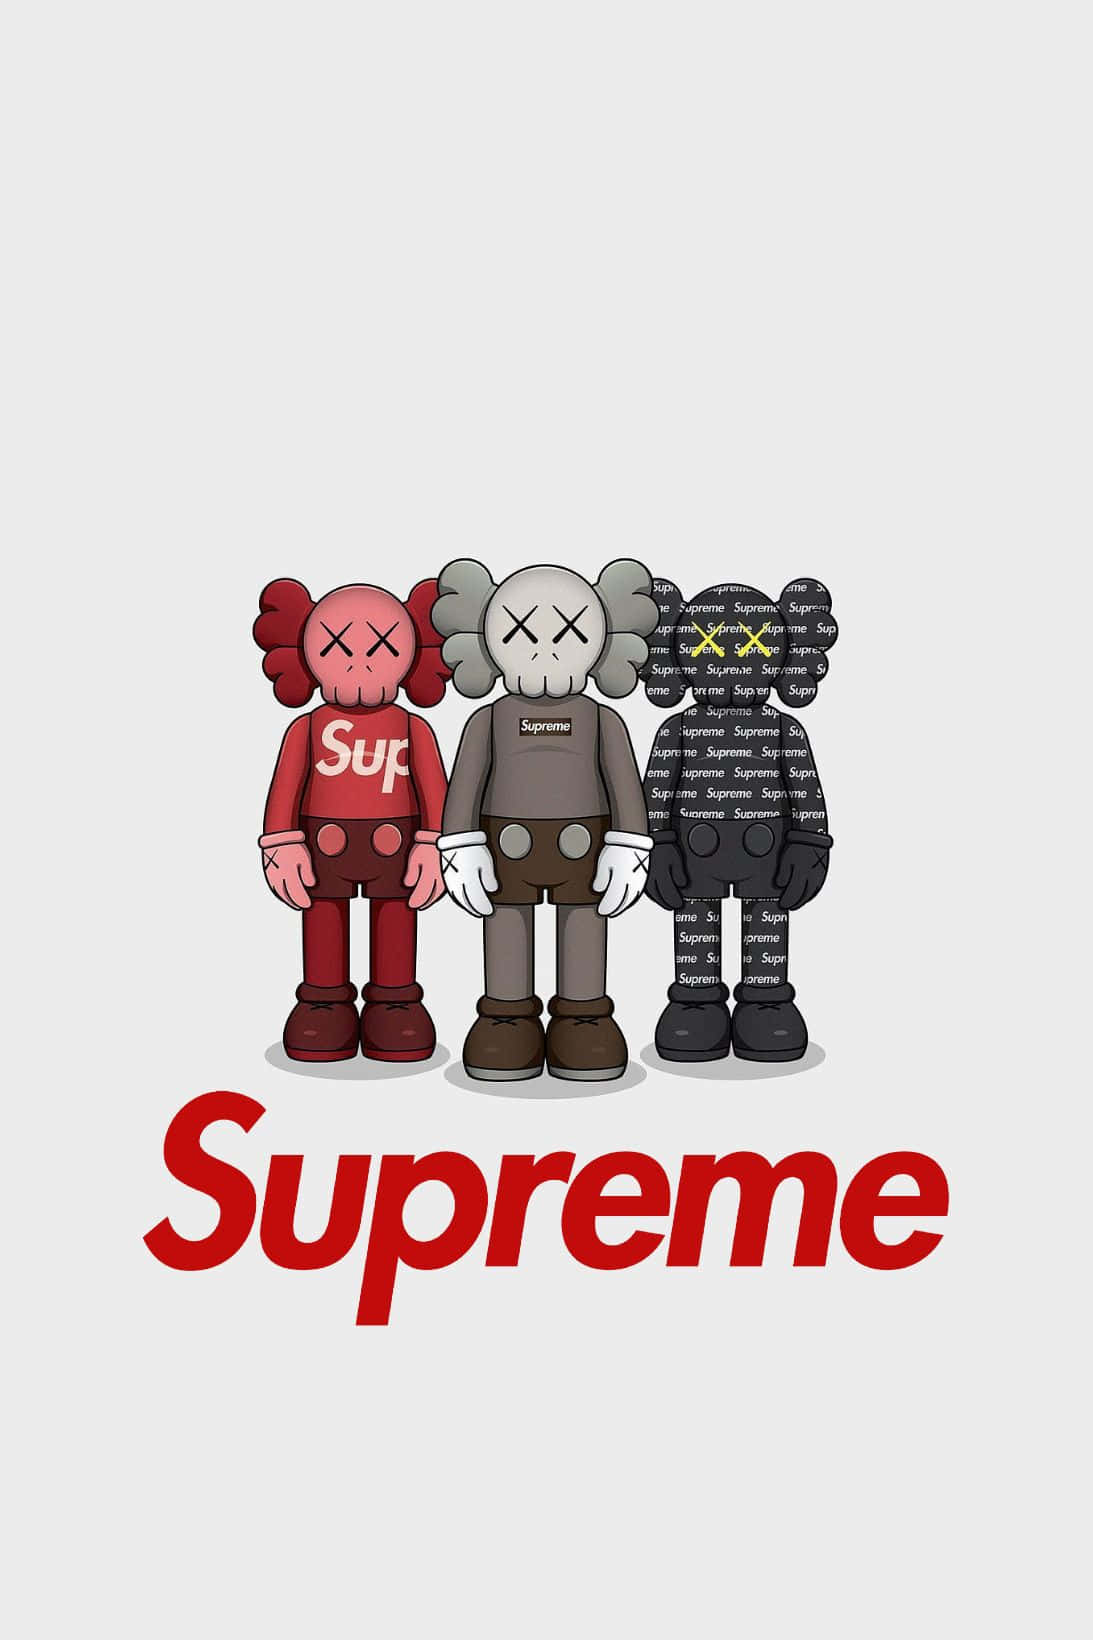 Kaws wallpaper ideas | Gallery posted by 444.nyeee | Lemon8